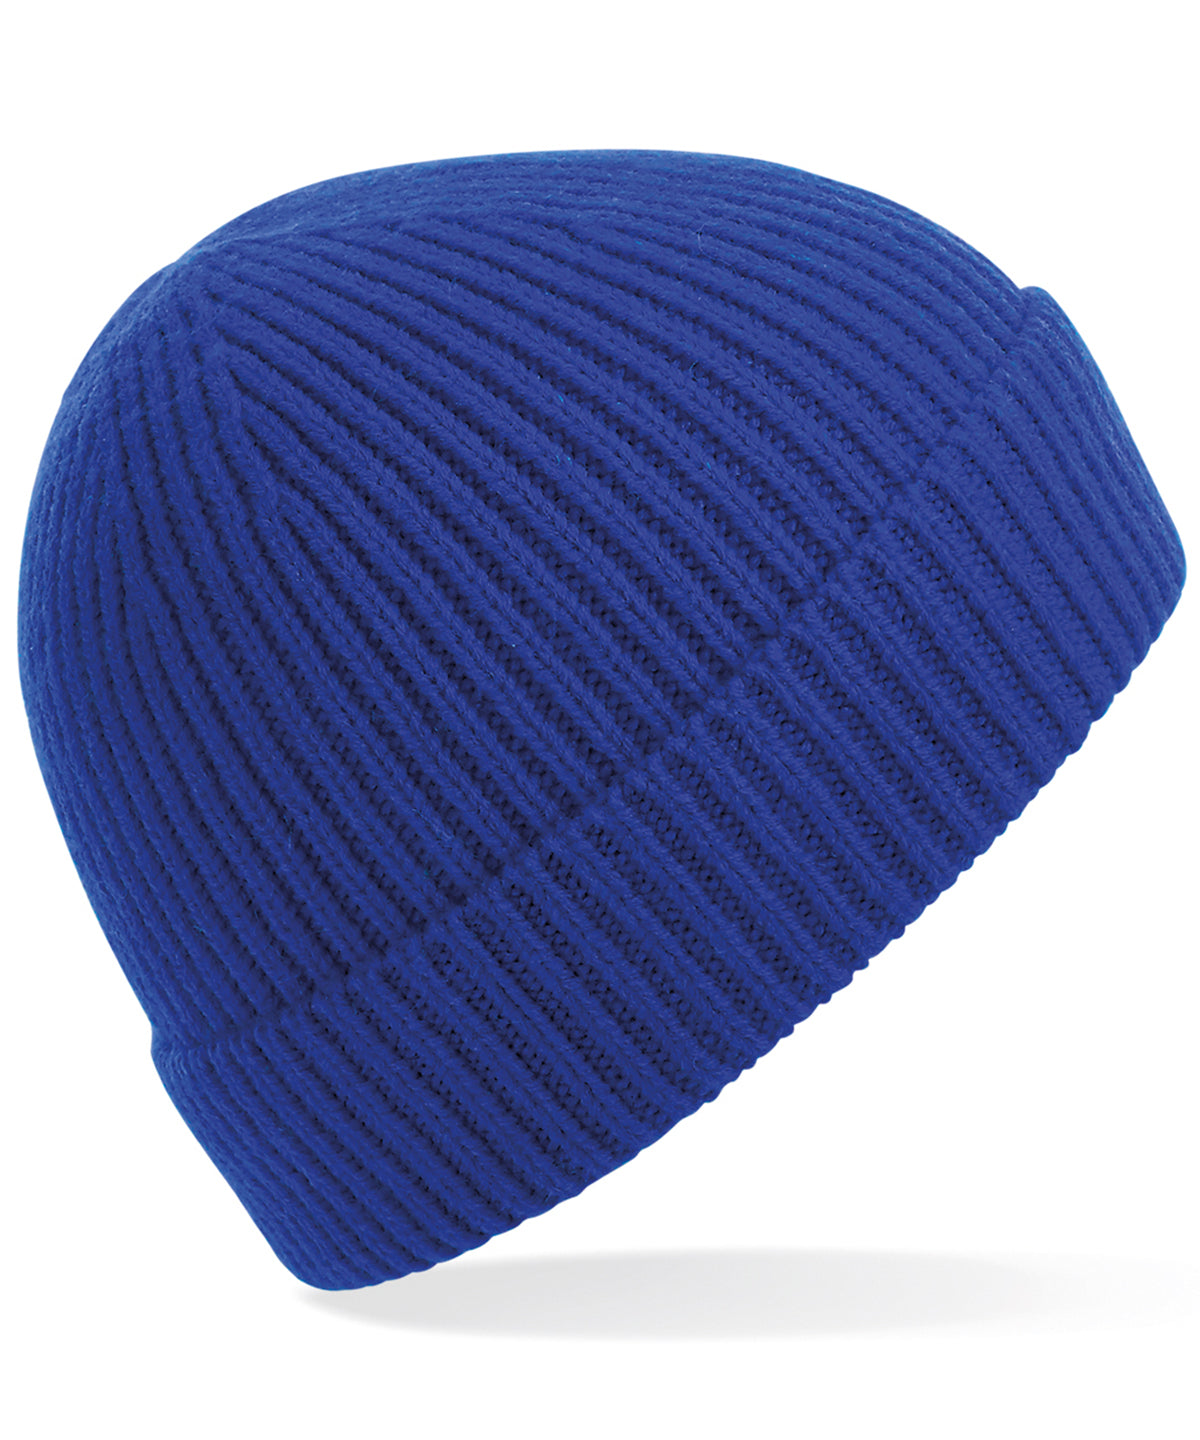 Personalised Hats - Royal Beechfield Engineered knit ribbed beanie